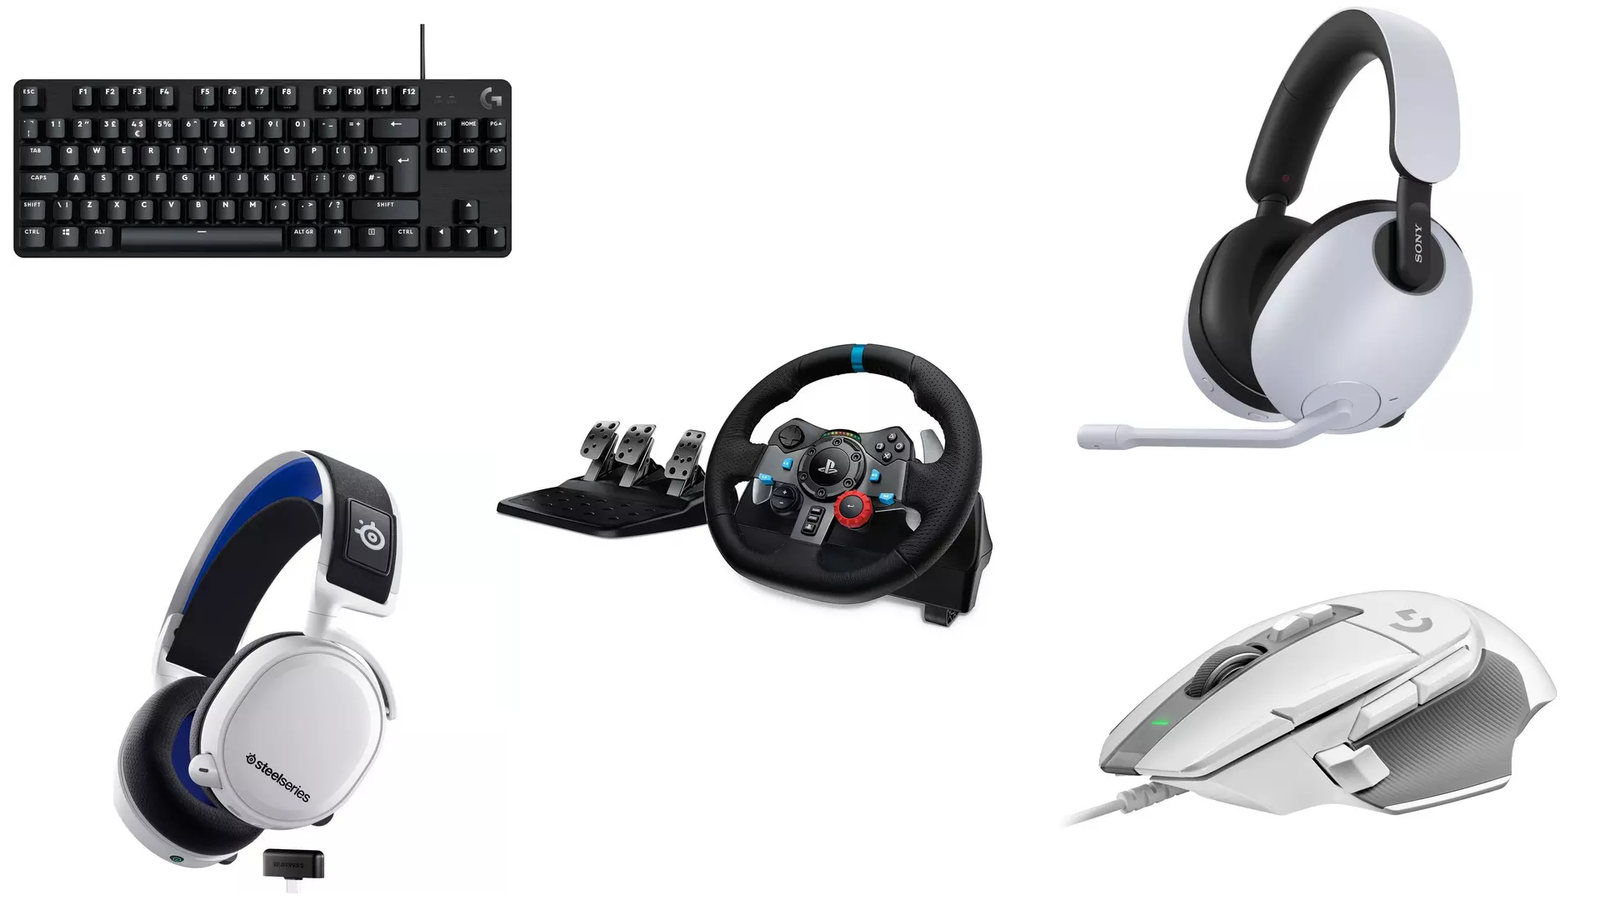 https://assetsio.reedpopcdn.com/currys-gaming30-discount-code-savings-on-gaming-accessories.jpg?width=1600&height=900&fit=crop&quality=100&format=png&enable=upscale&auto=webp